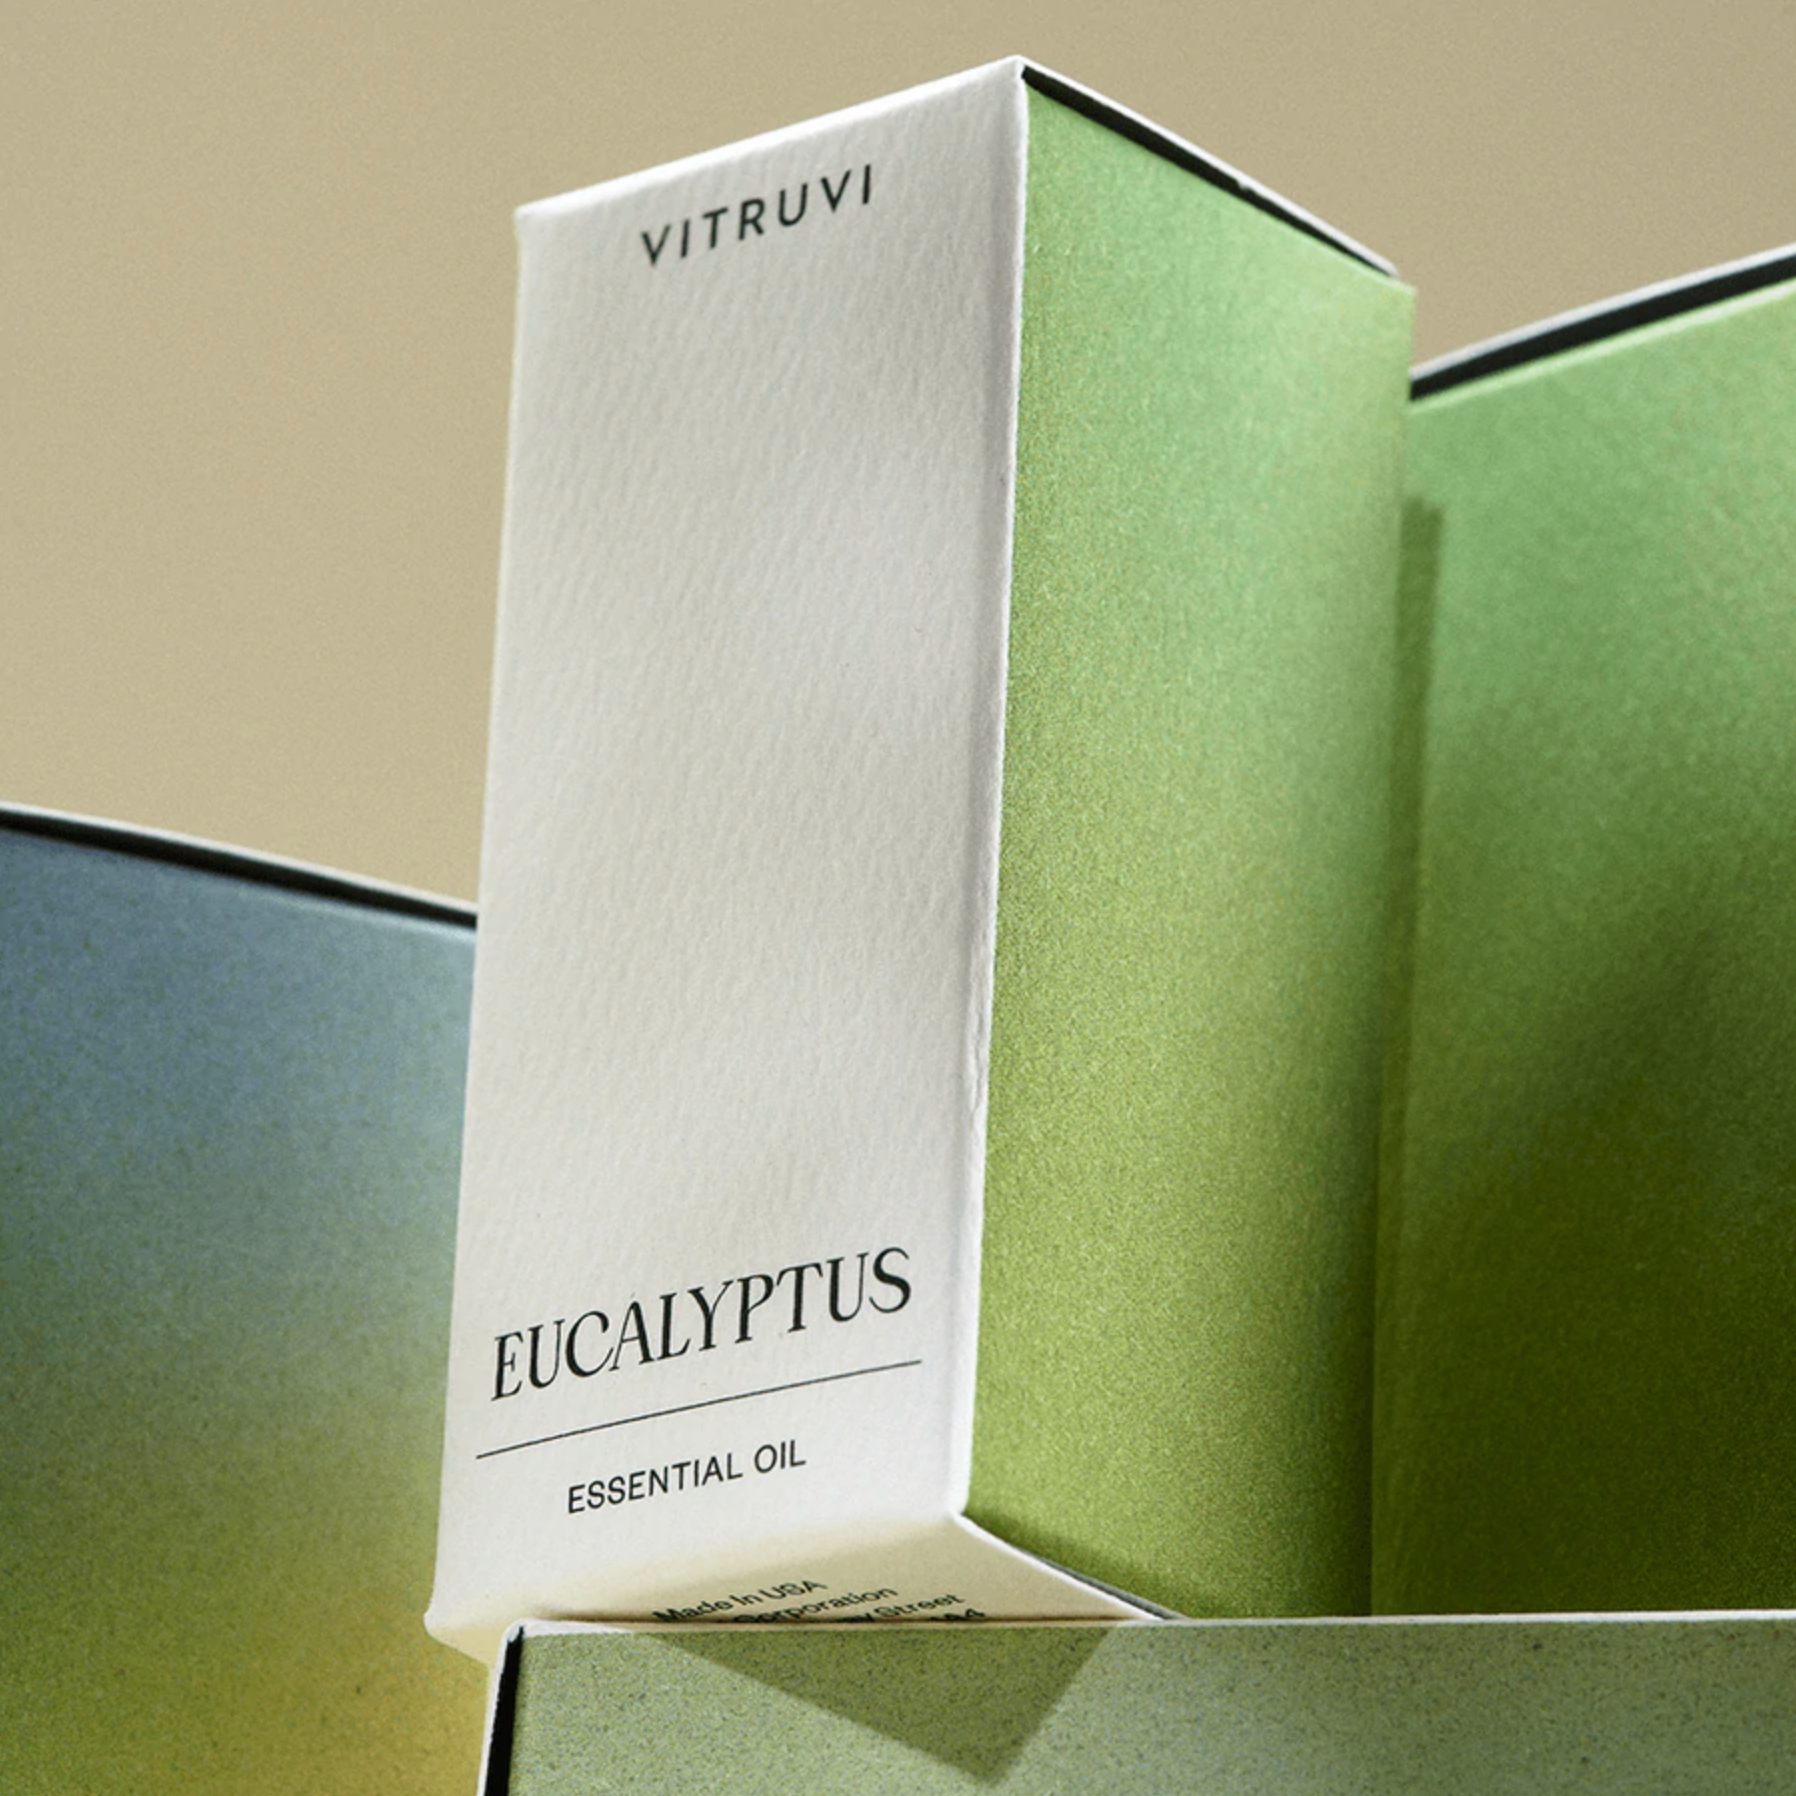 White and green box with &quot;VITRUVI EUCALYPTUS ESSENTIAL OIL&quot; written on the front.